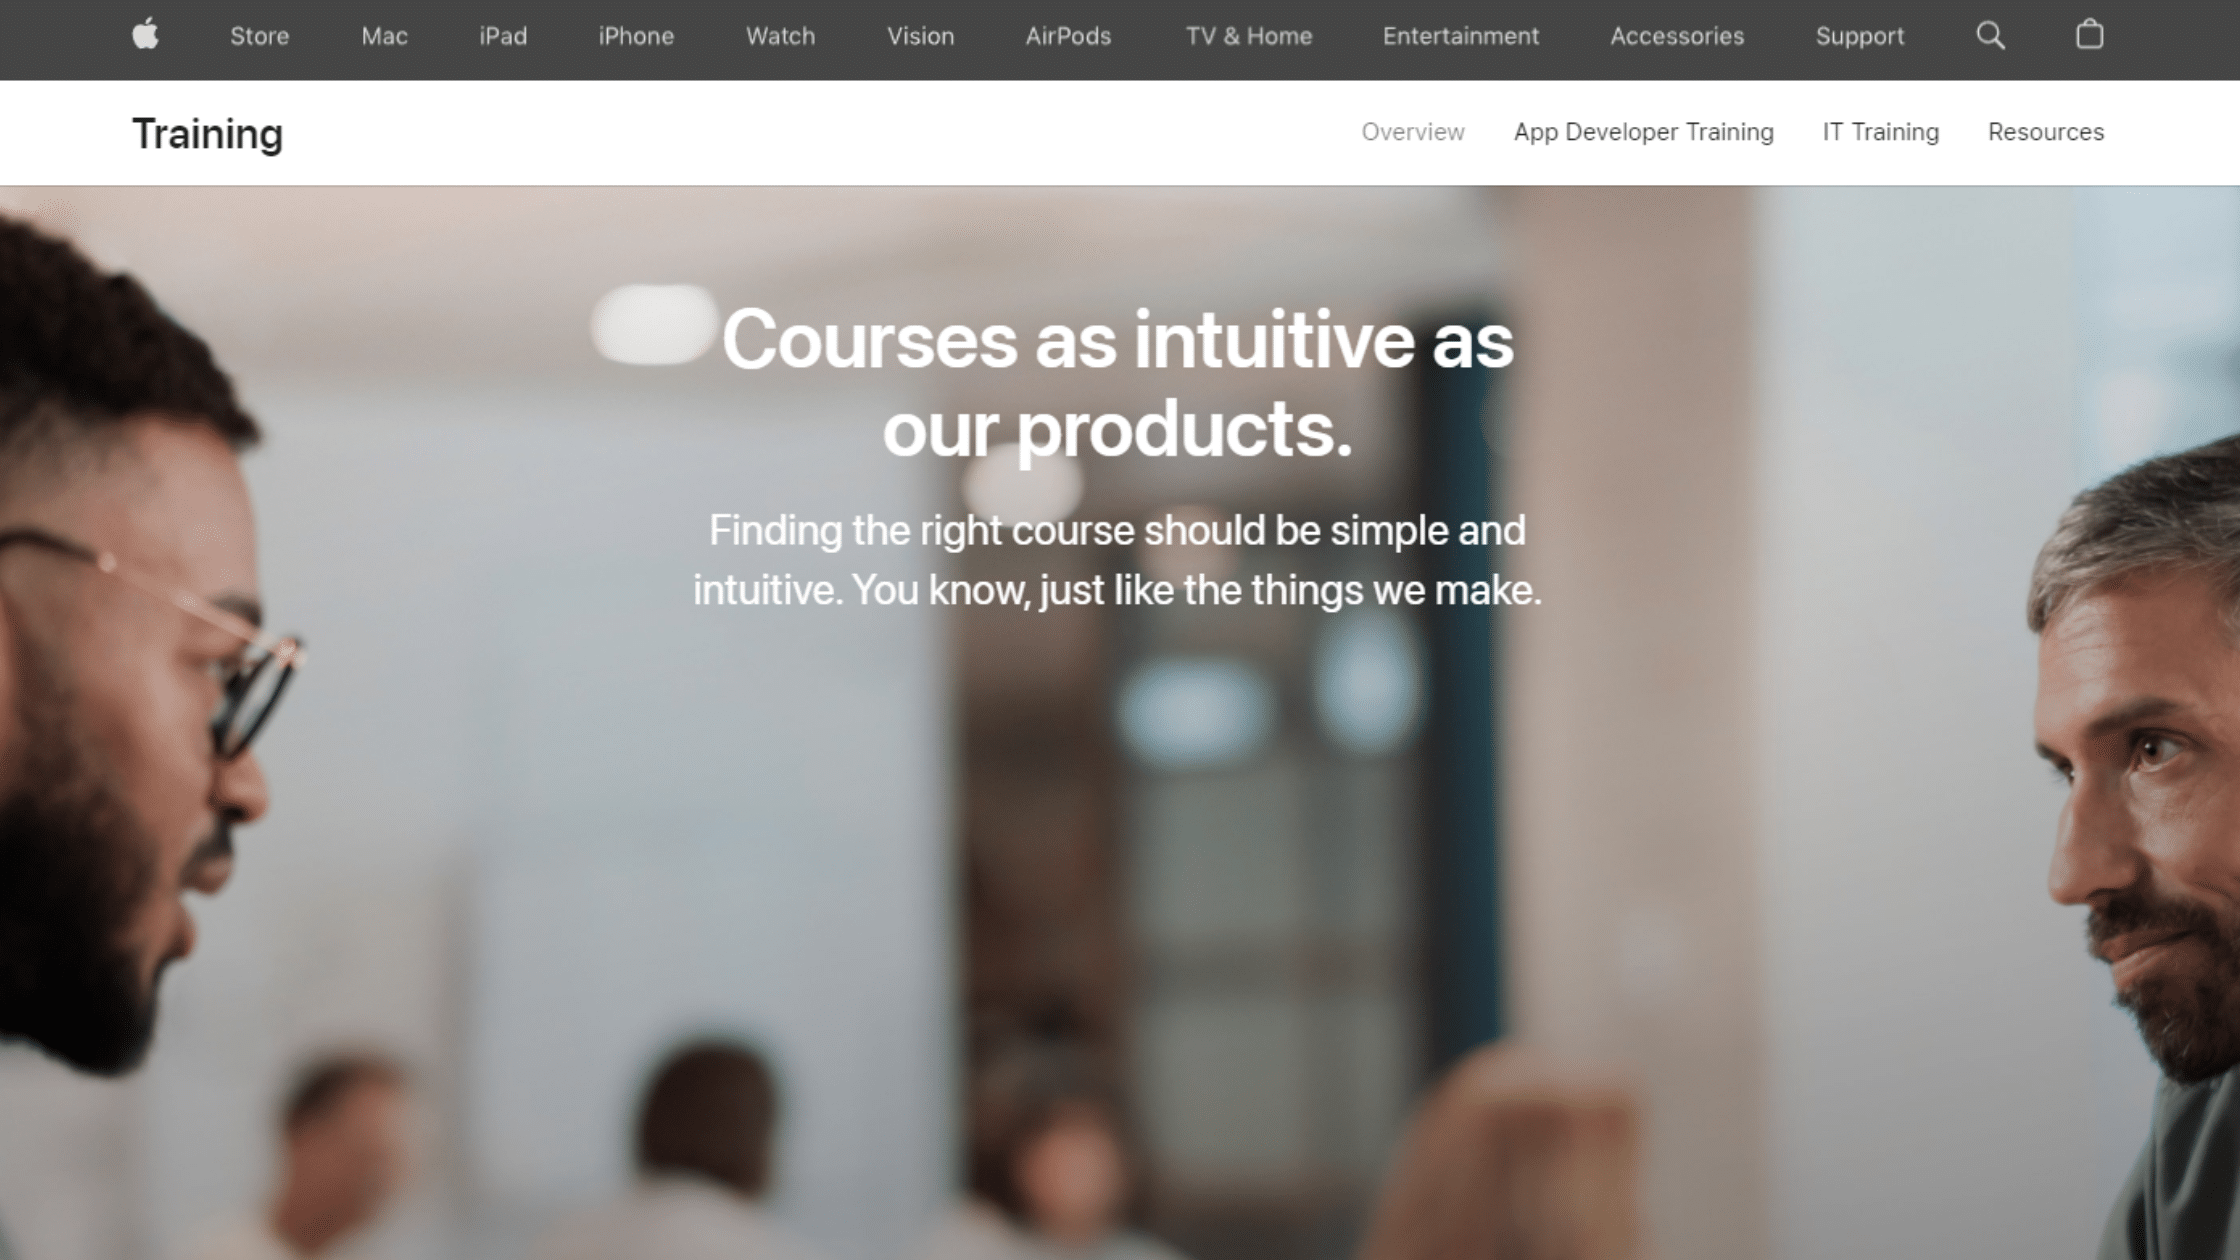 An image of Apple's Training homepage